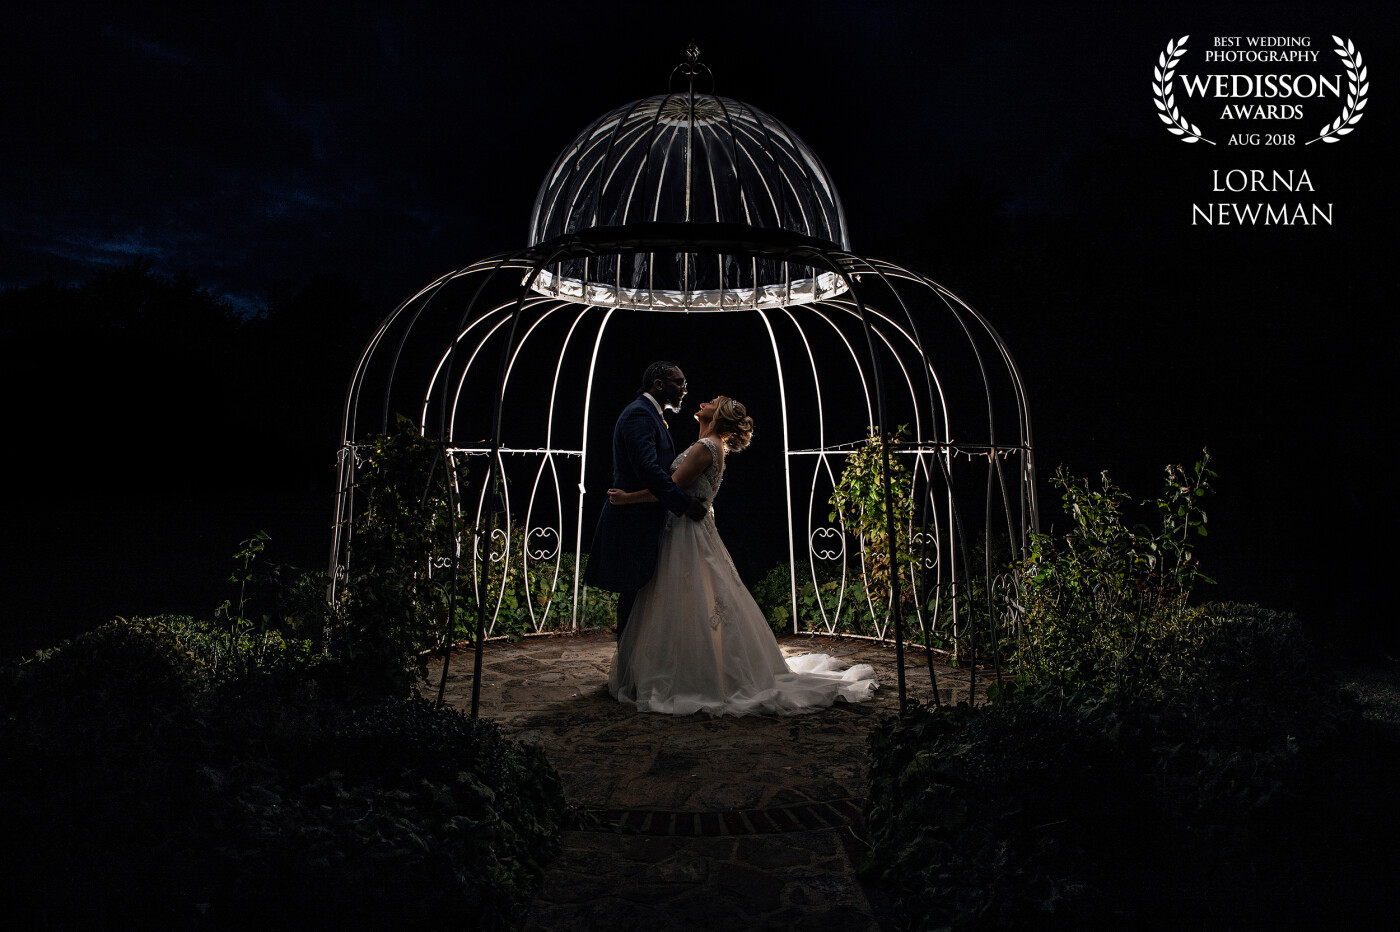 This was the last shot taken of the day when lovely Georgina & Junior got hitched last month at the beautiful Parklands Quendon Hall. We lit up the gardens for a romantic moment to make this picture.